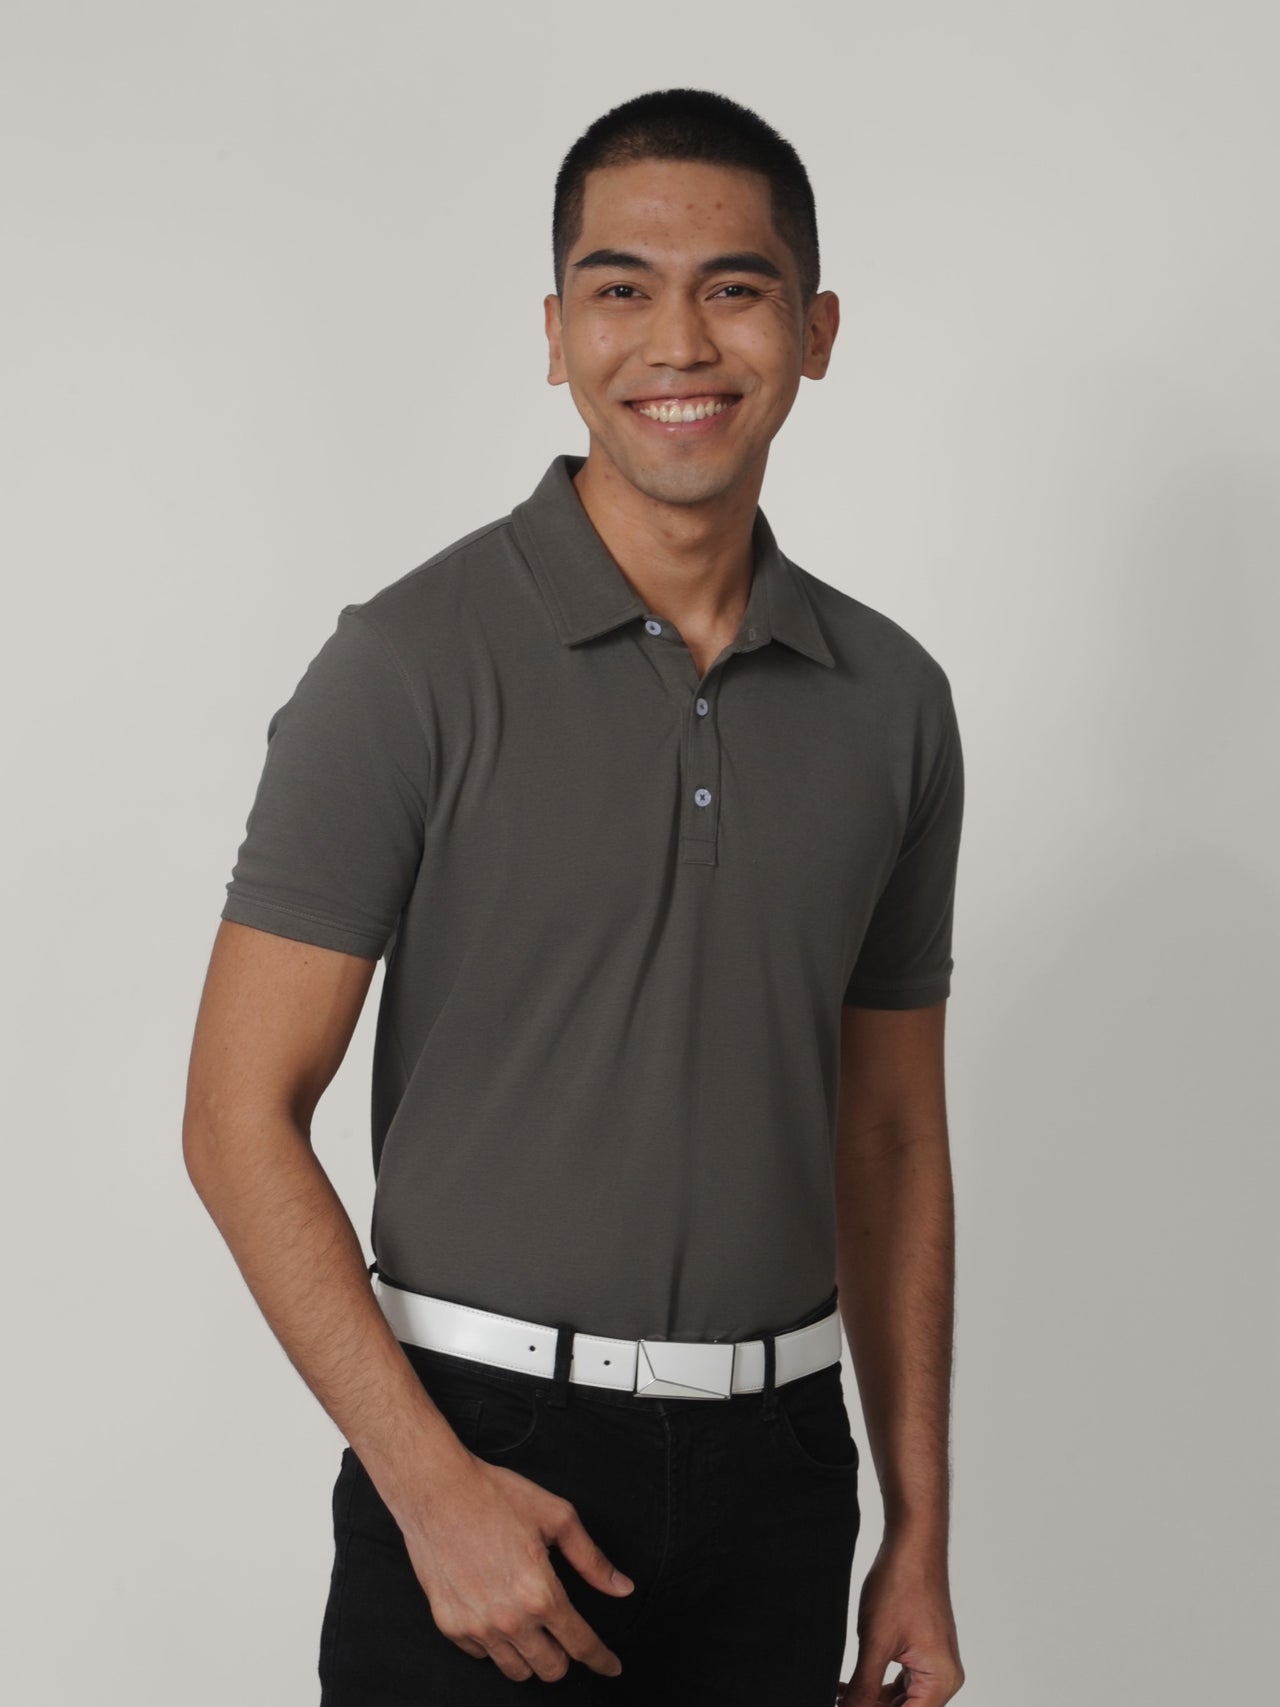 A tall skinny guy smiling and wearing a grey medium tall polo shirt.